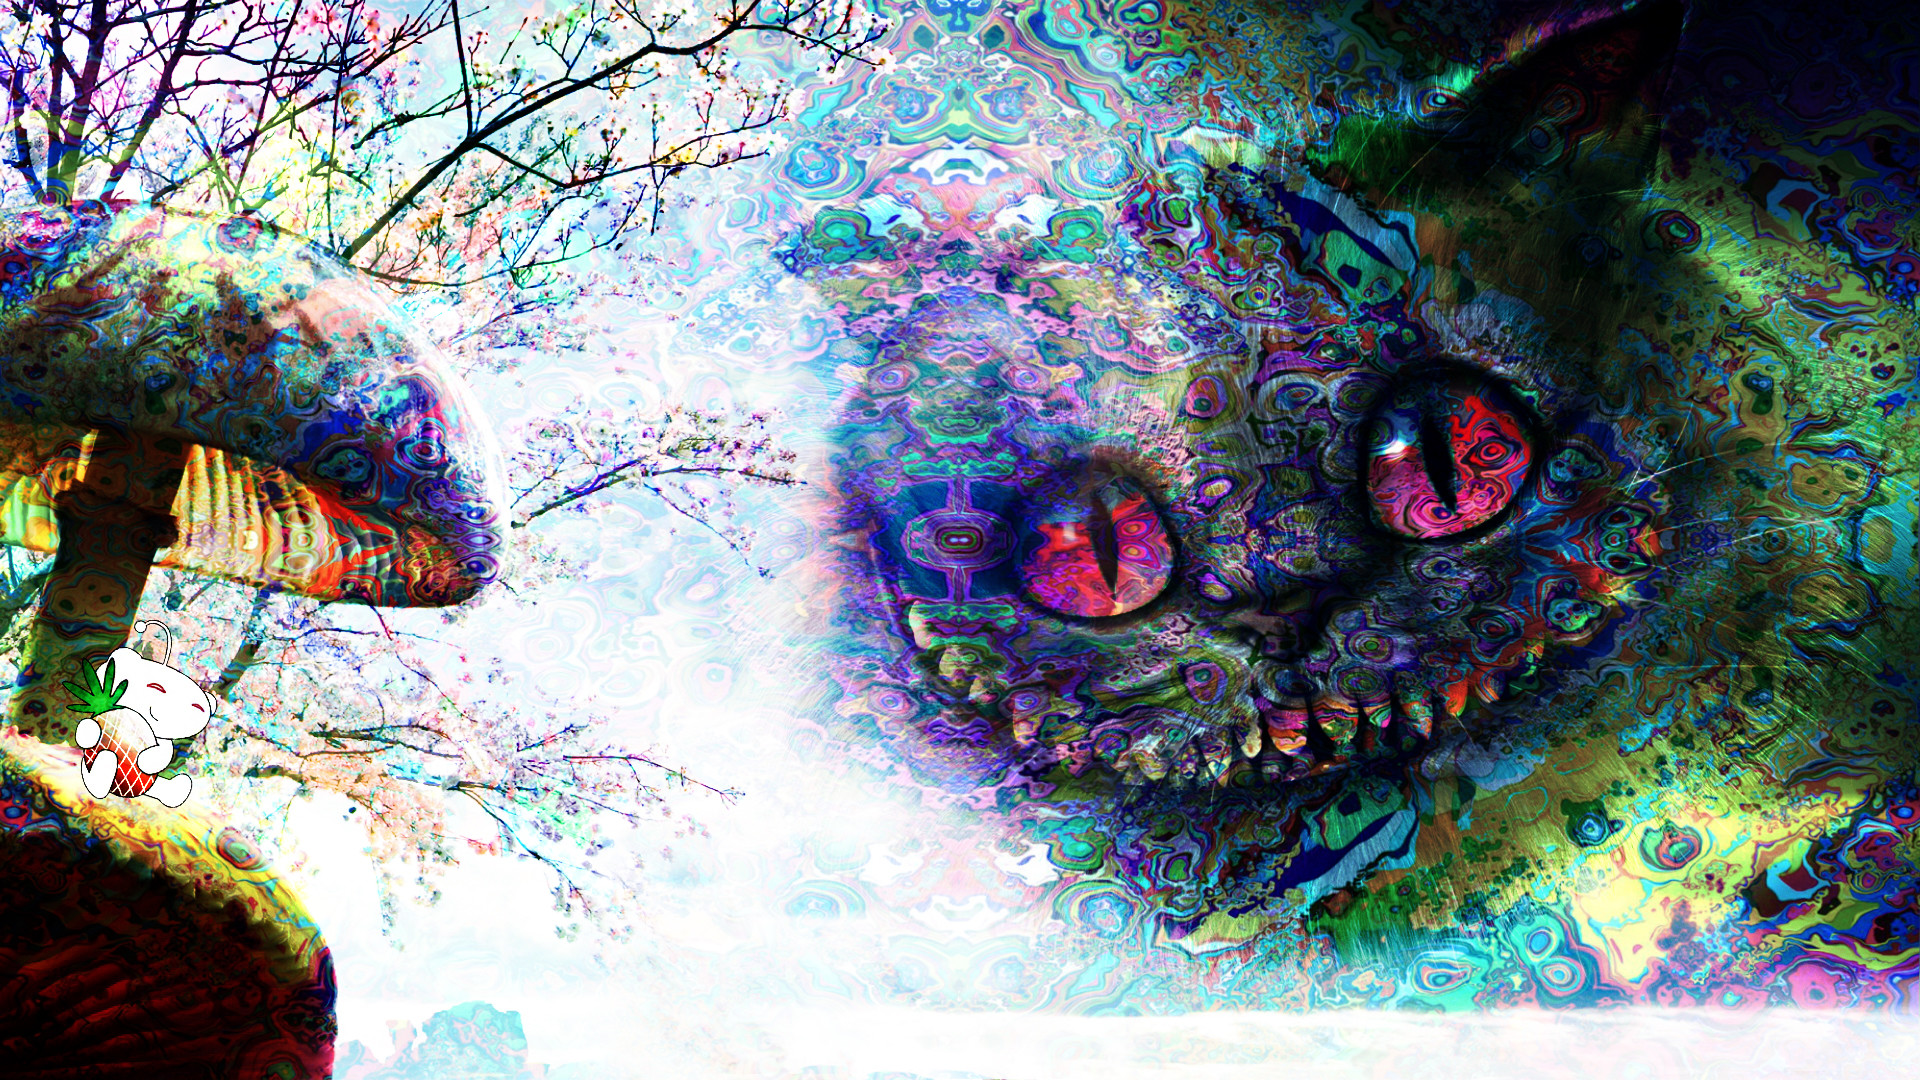 1920x1080 ... Images of Trippy Cat Wallpaper Cool - #SC ...